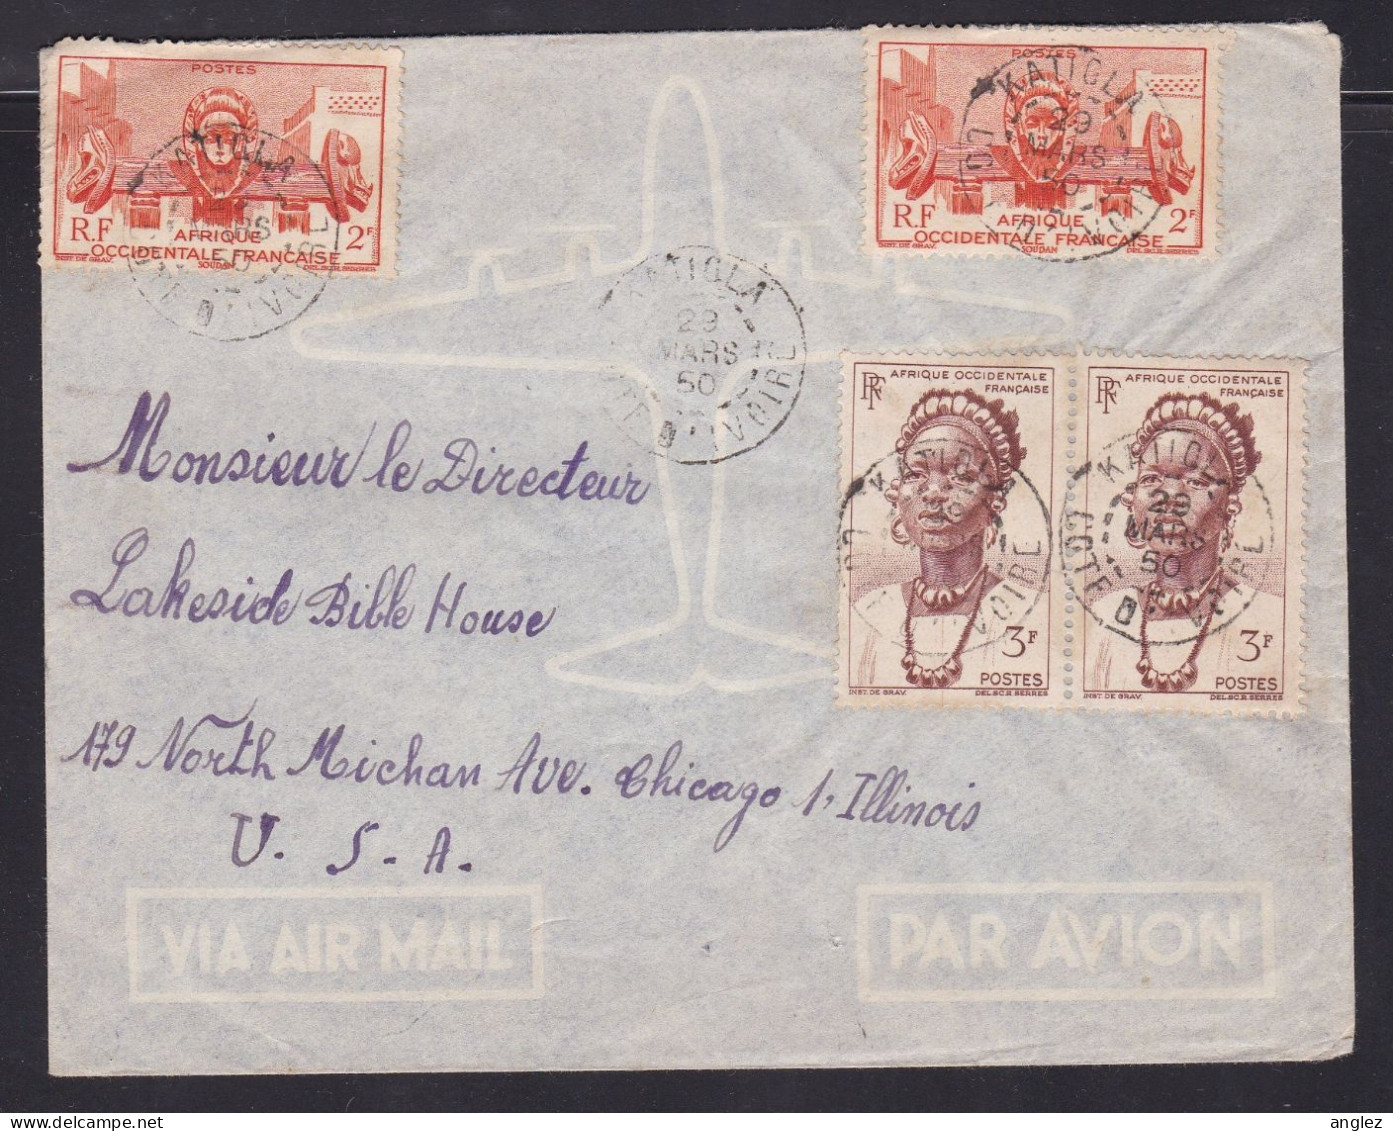 France / AOF / Cote D'Ivoire / Ivory Coast - 1950 Airmail Cover Katiola To Chicago USA - Cartas & Documentos